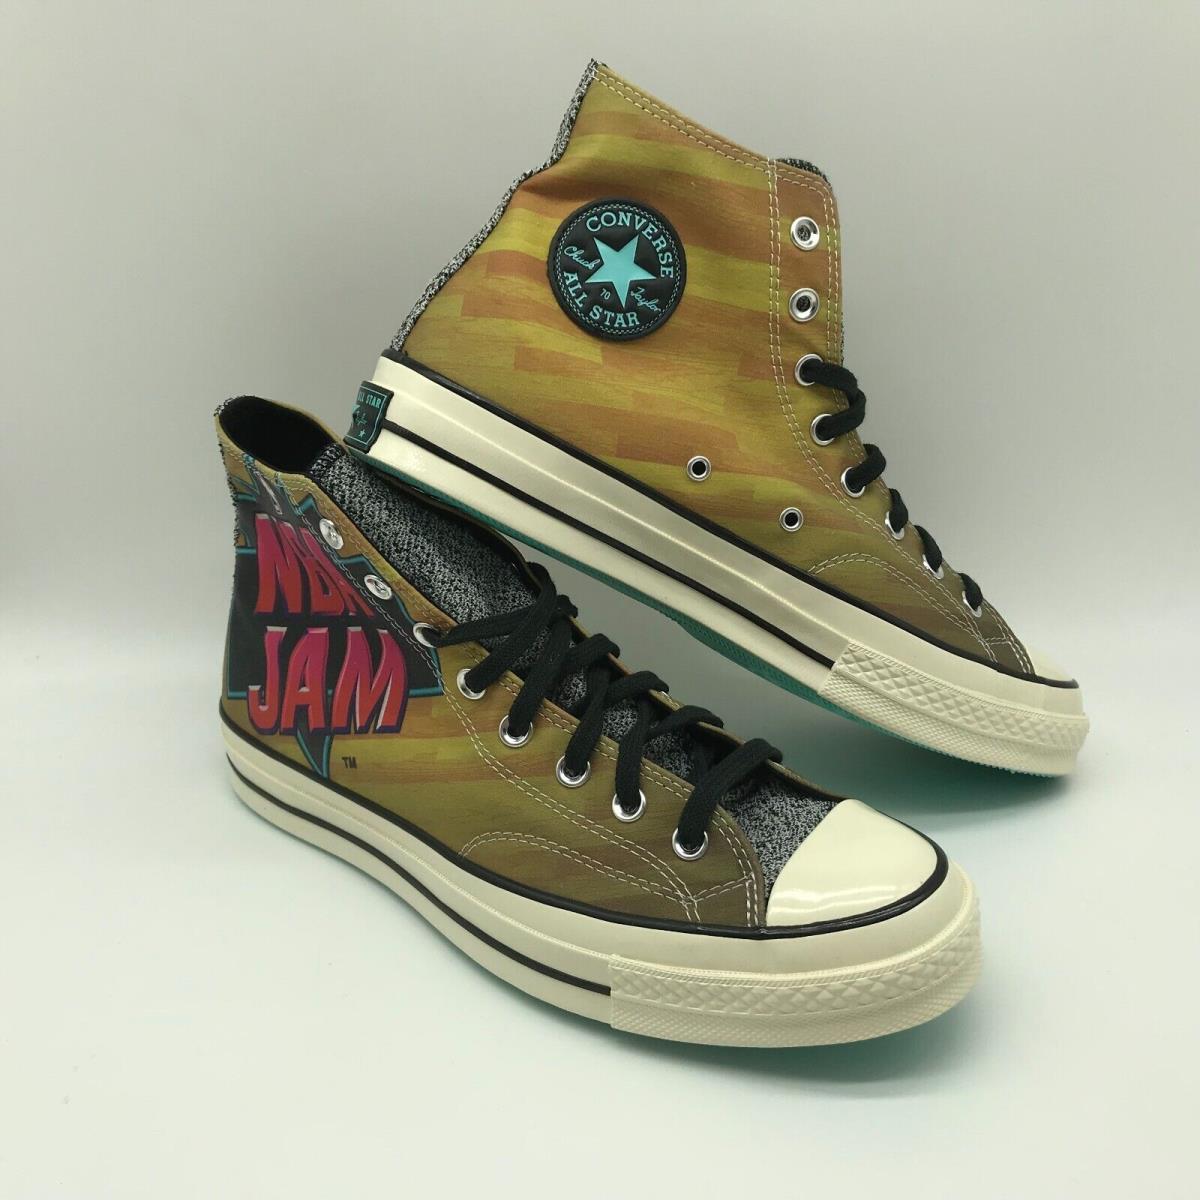 Converse Brand - Shop Converse best selling | SporTipTop - Page 27